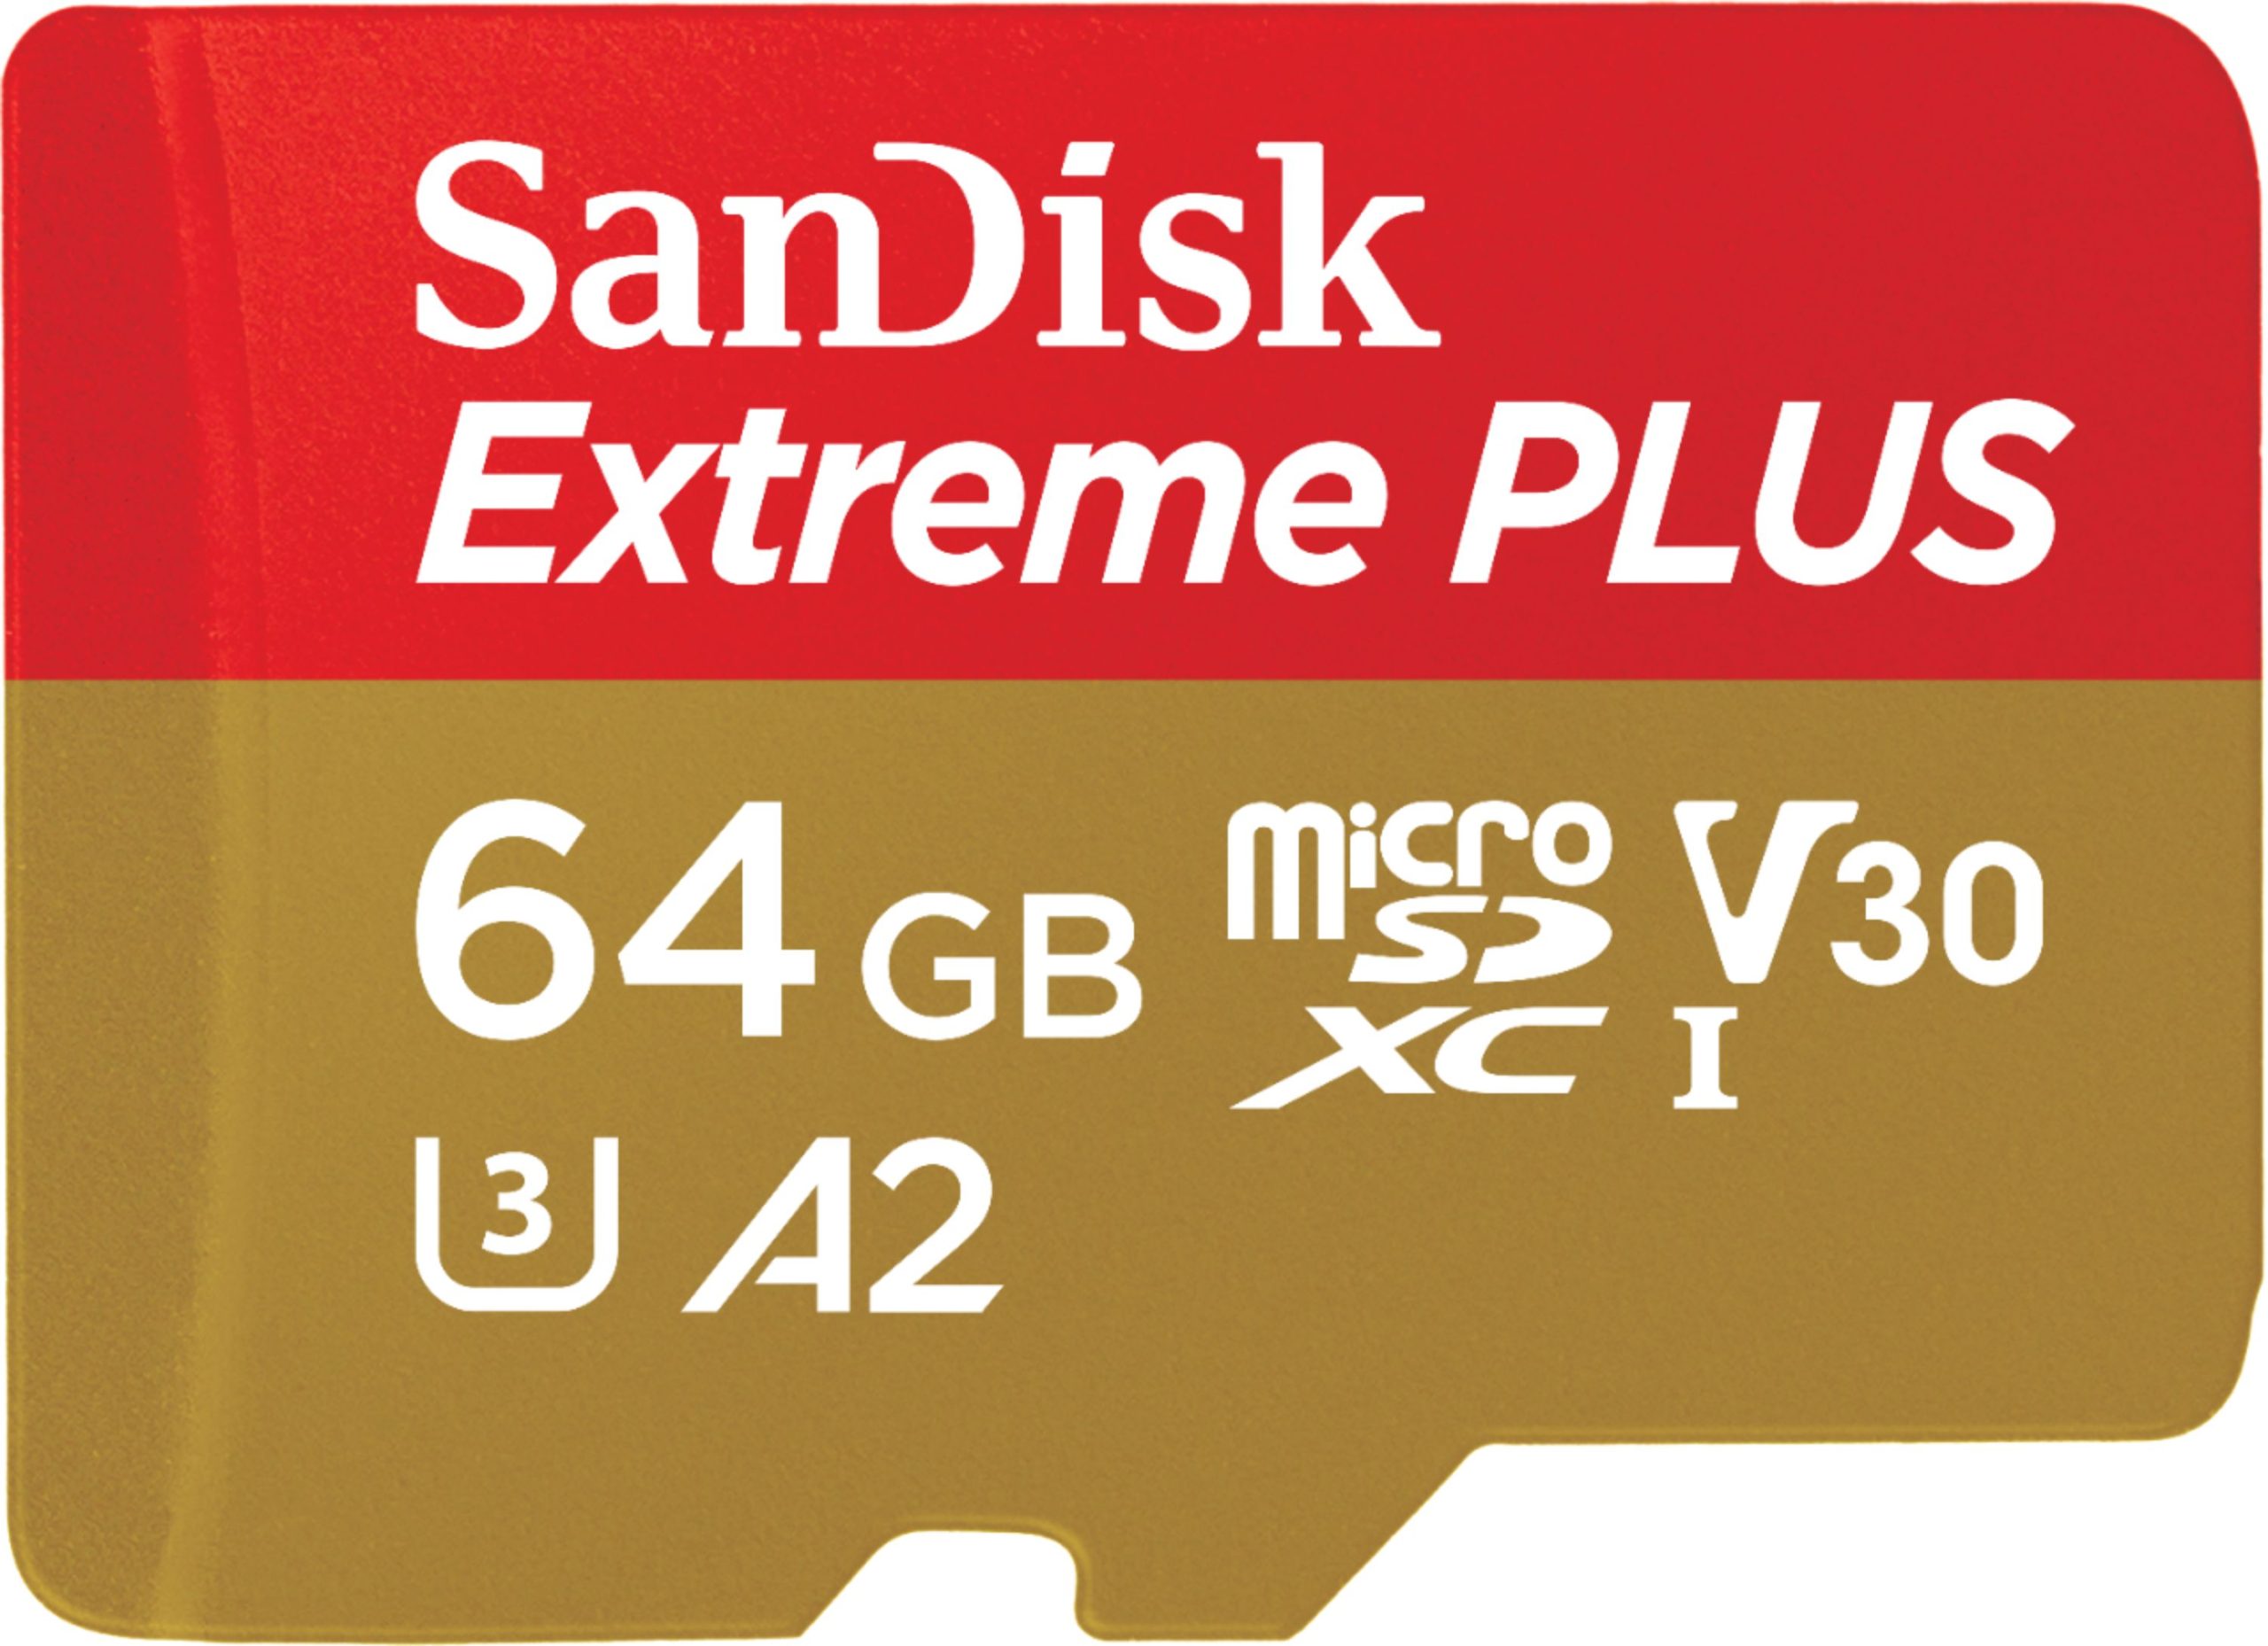 SanDisk – Extreme PLUS 64GB microSDXC UHS-I Memory Card – Just $28.99 at Best Buy